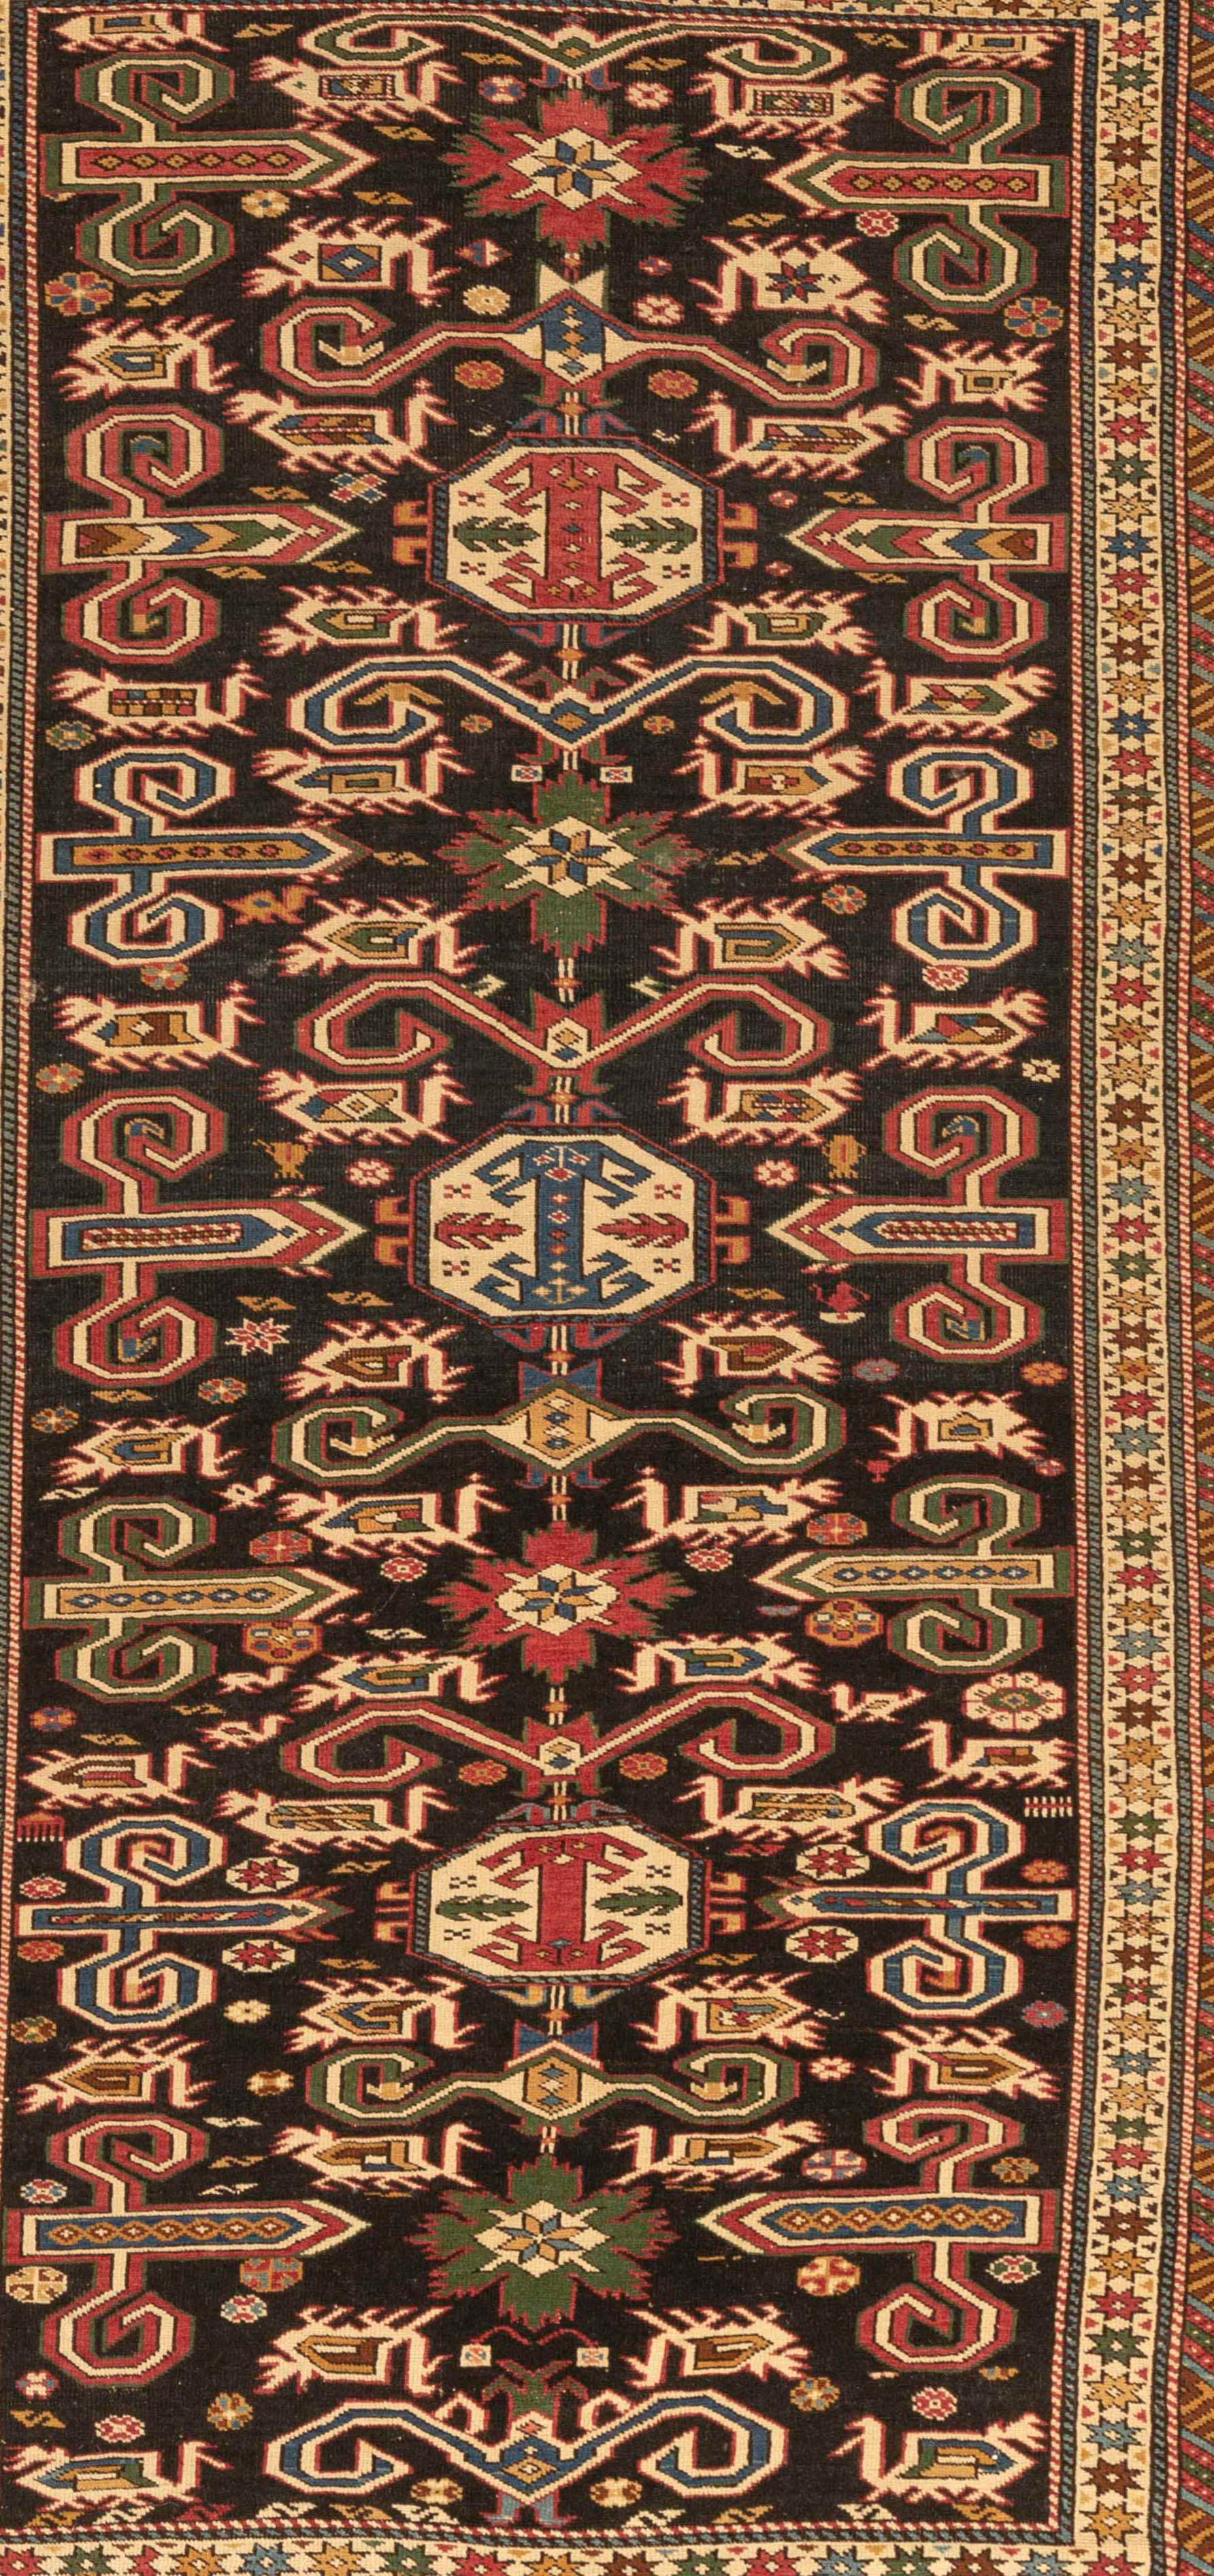 Antique Caucasian Perpedil Shirvan rug, circa 1880 from the town of the same name situated to the southeast of Kuba in the Caucasian region of Daghestan. Featuring the distinctive ram's Horn design associated with rugs from this area on a dark blue